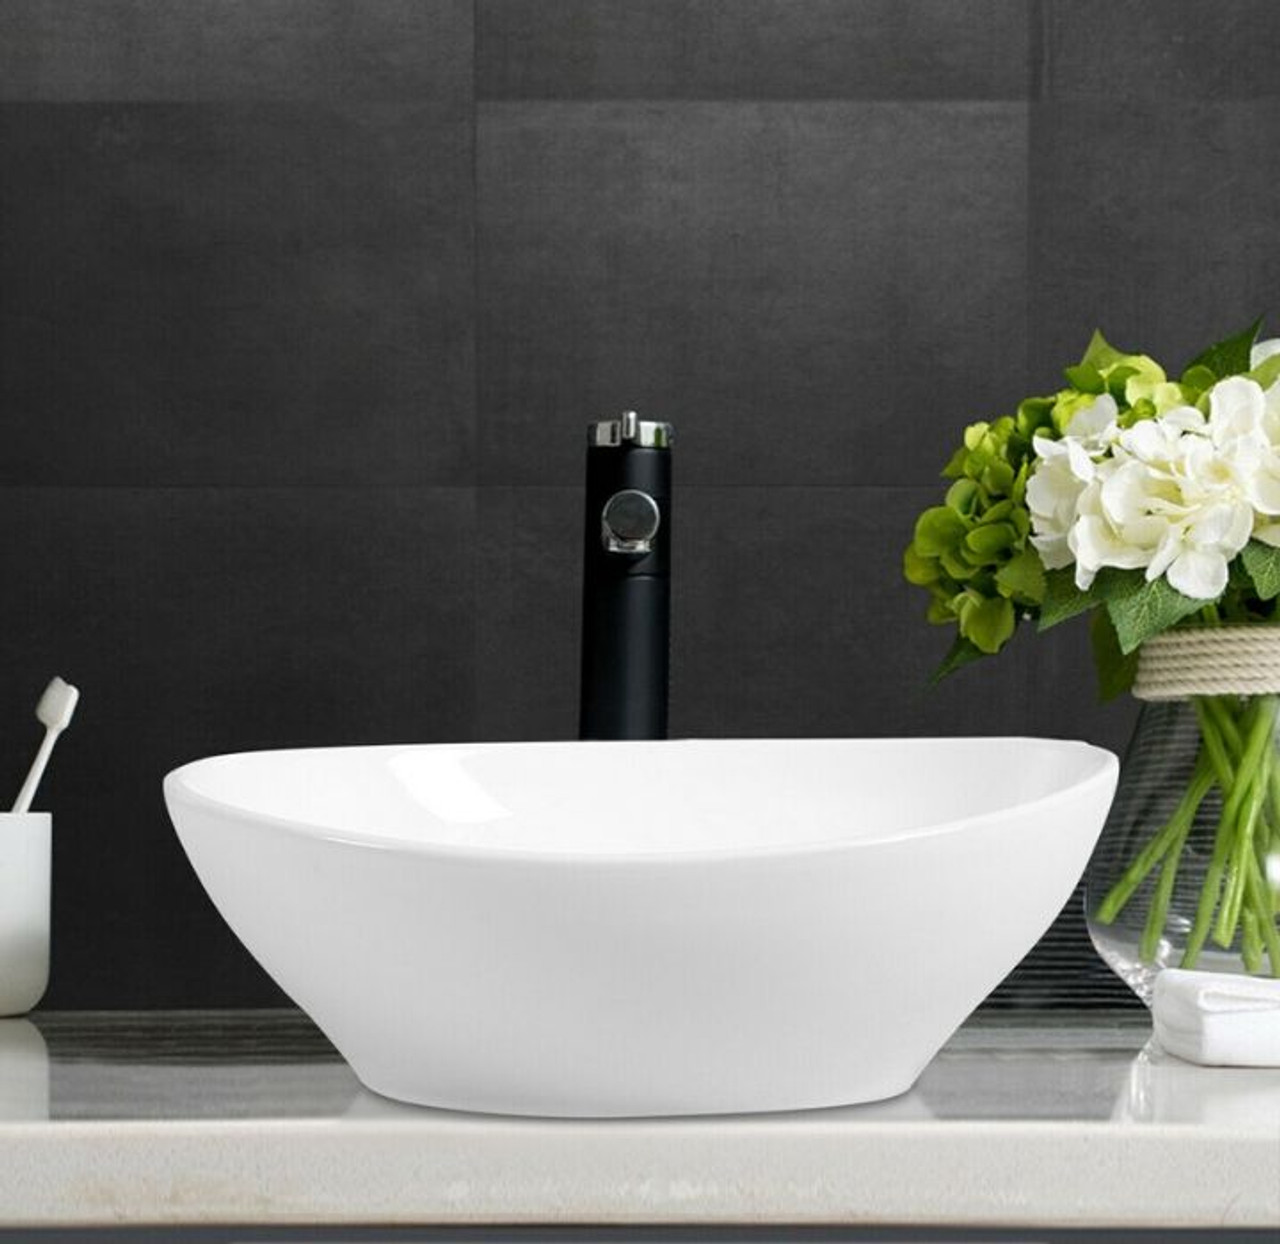 White Ceramic Oval Bathroom Sink product image